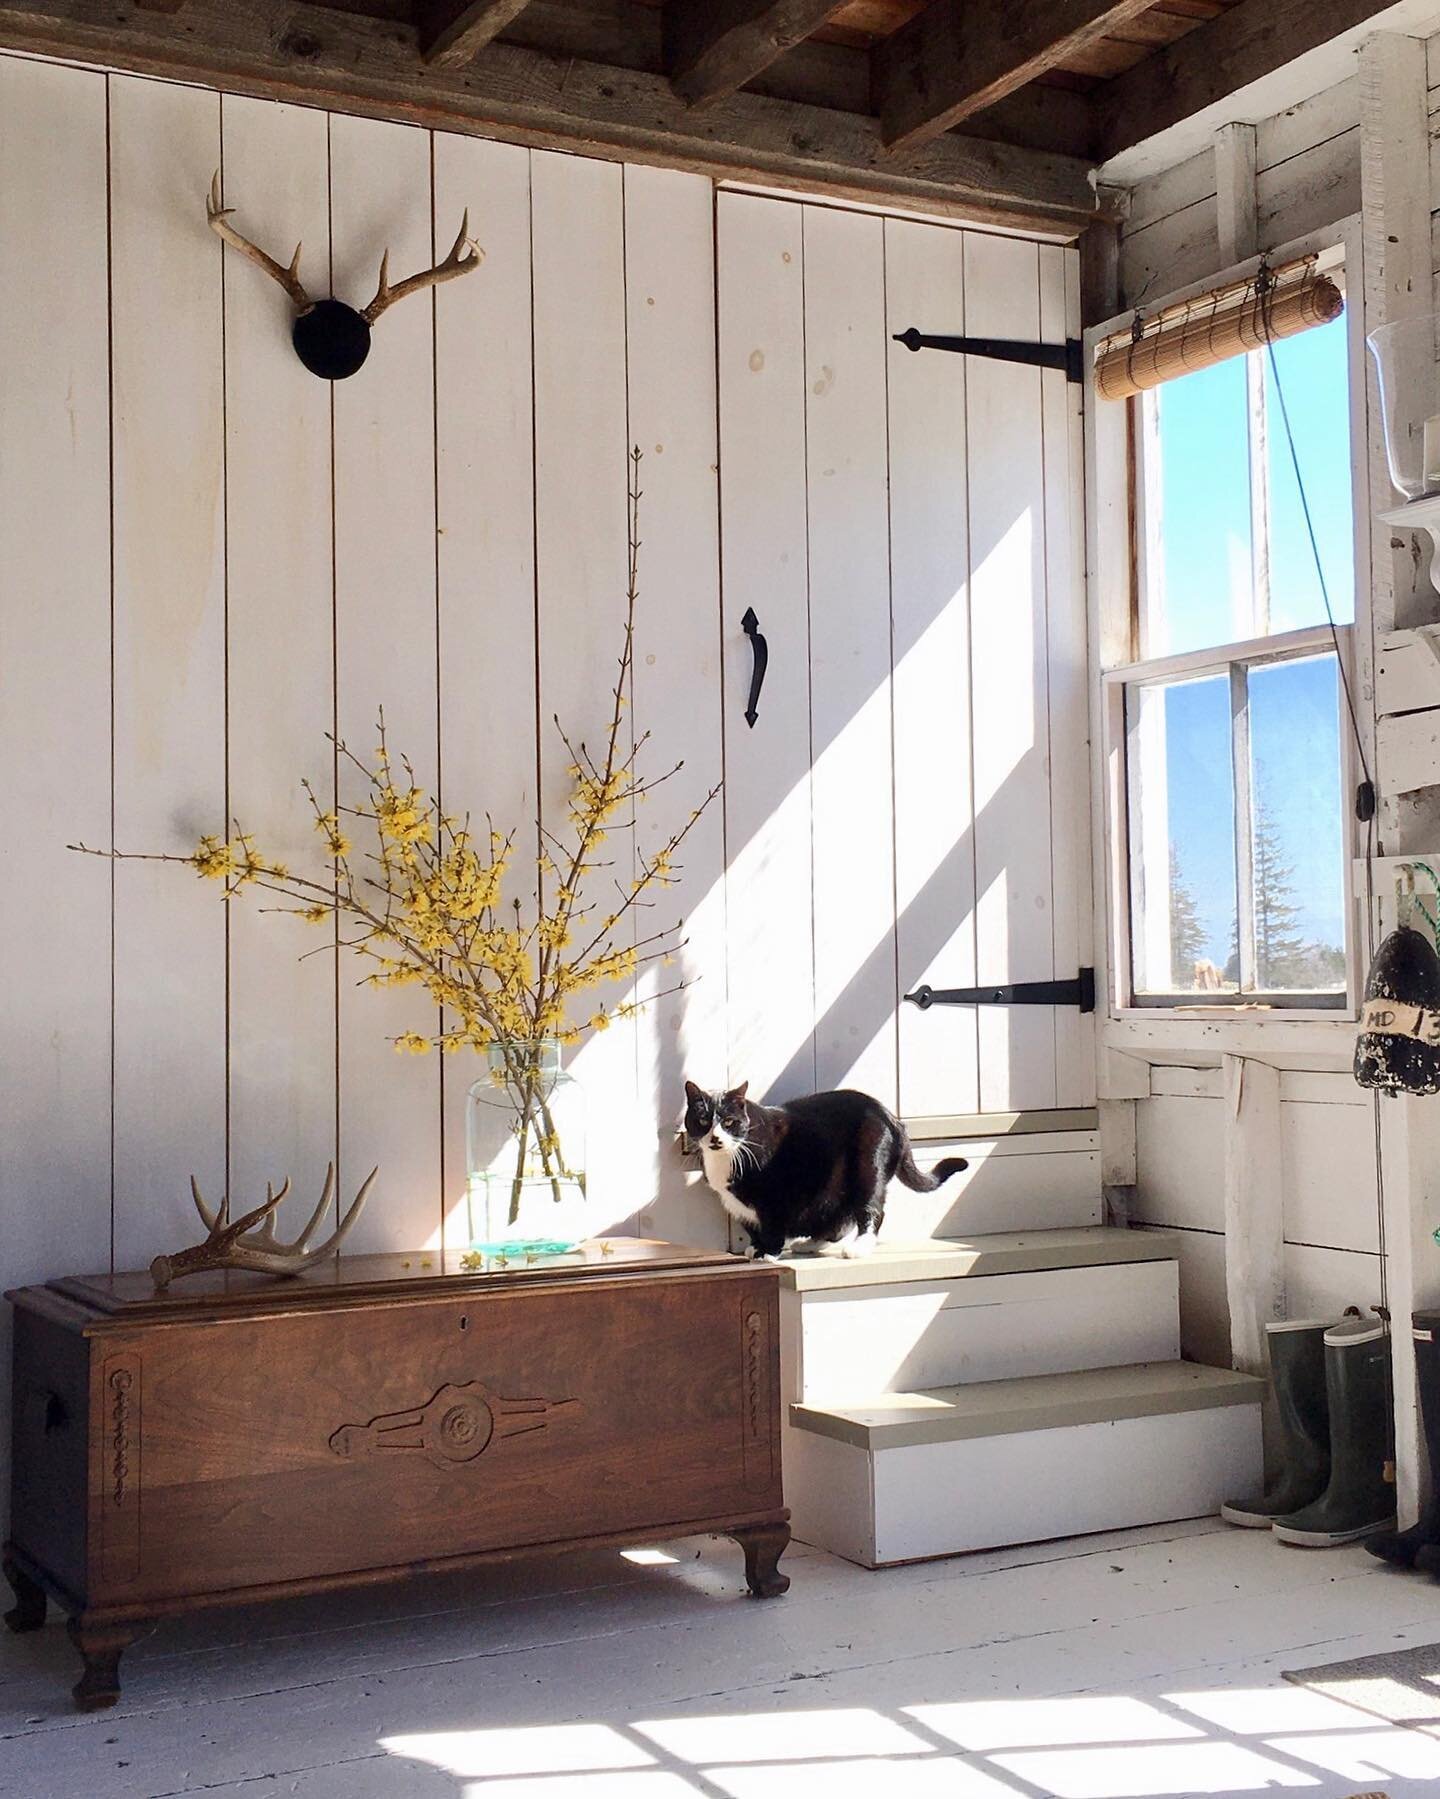 Forsythia and sunshine and cats and old barns by the sea &hellip; 💛 
.
#CRIDathome #carolreedinteriordesign #barns #seaside #interiorstyle #interiorinspo #barnstyle #homedesign #gothicfarmhouse #eastcoaststyle #coastalliving #oldhouse #spring #catso